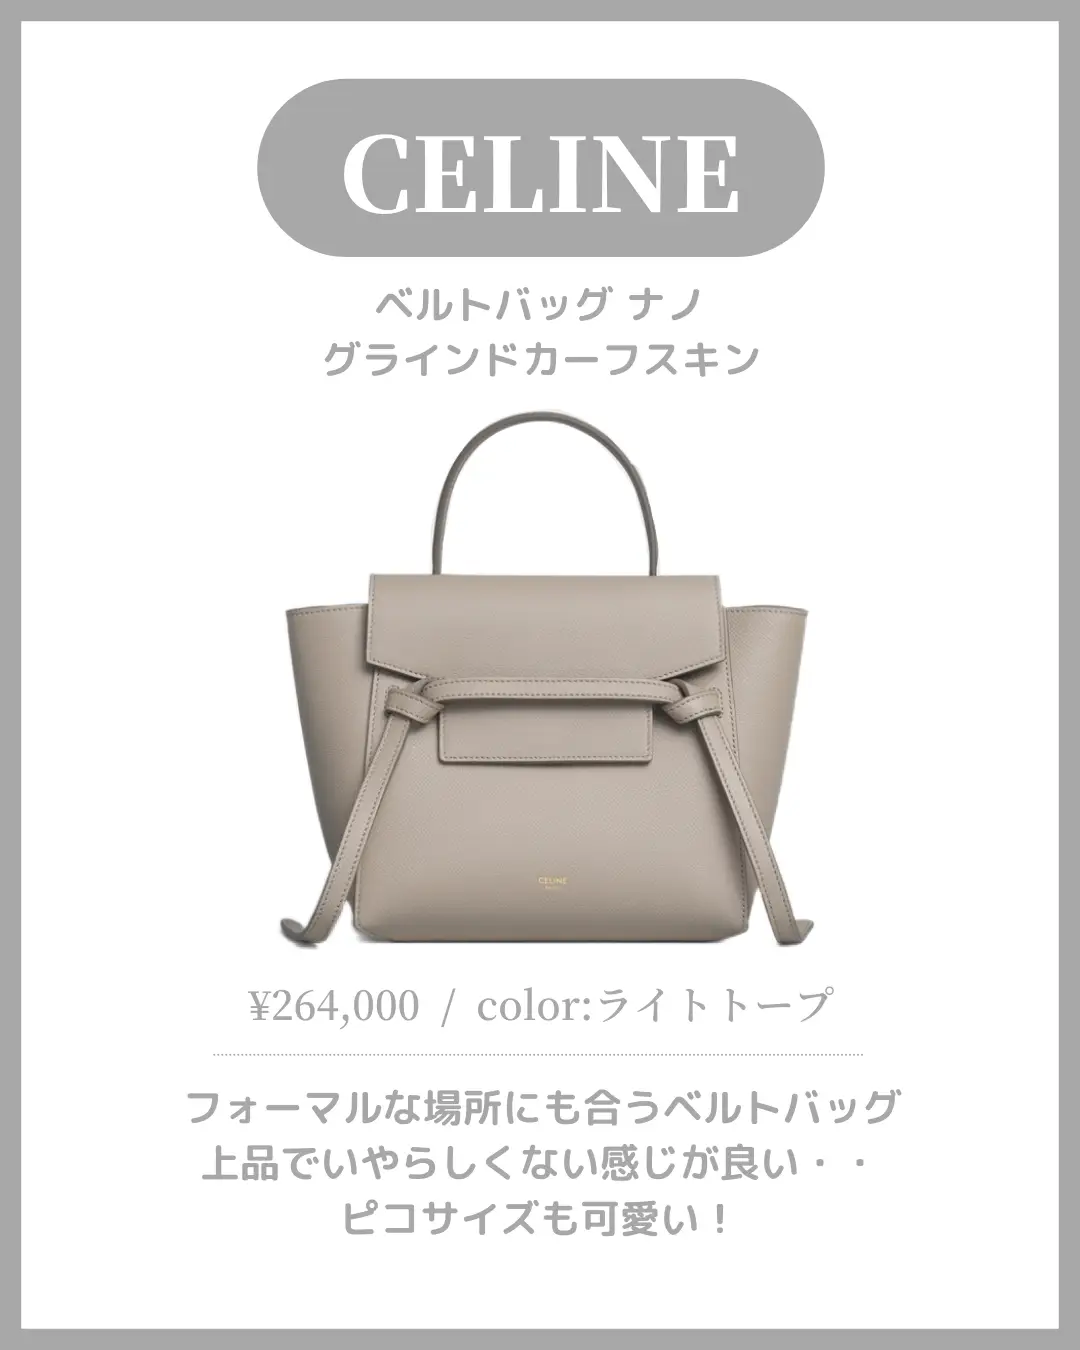 High brand BAG / want to buy in real, Gallery posted by m子 🚺